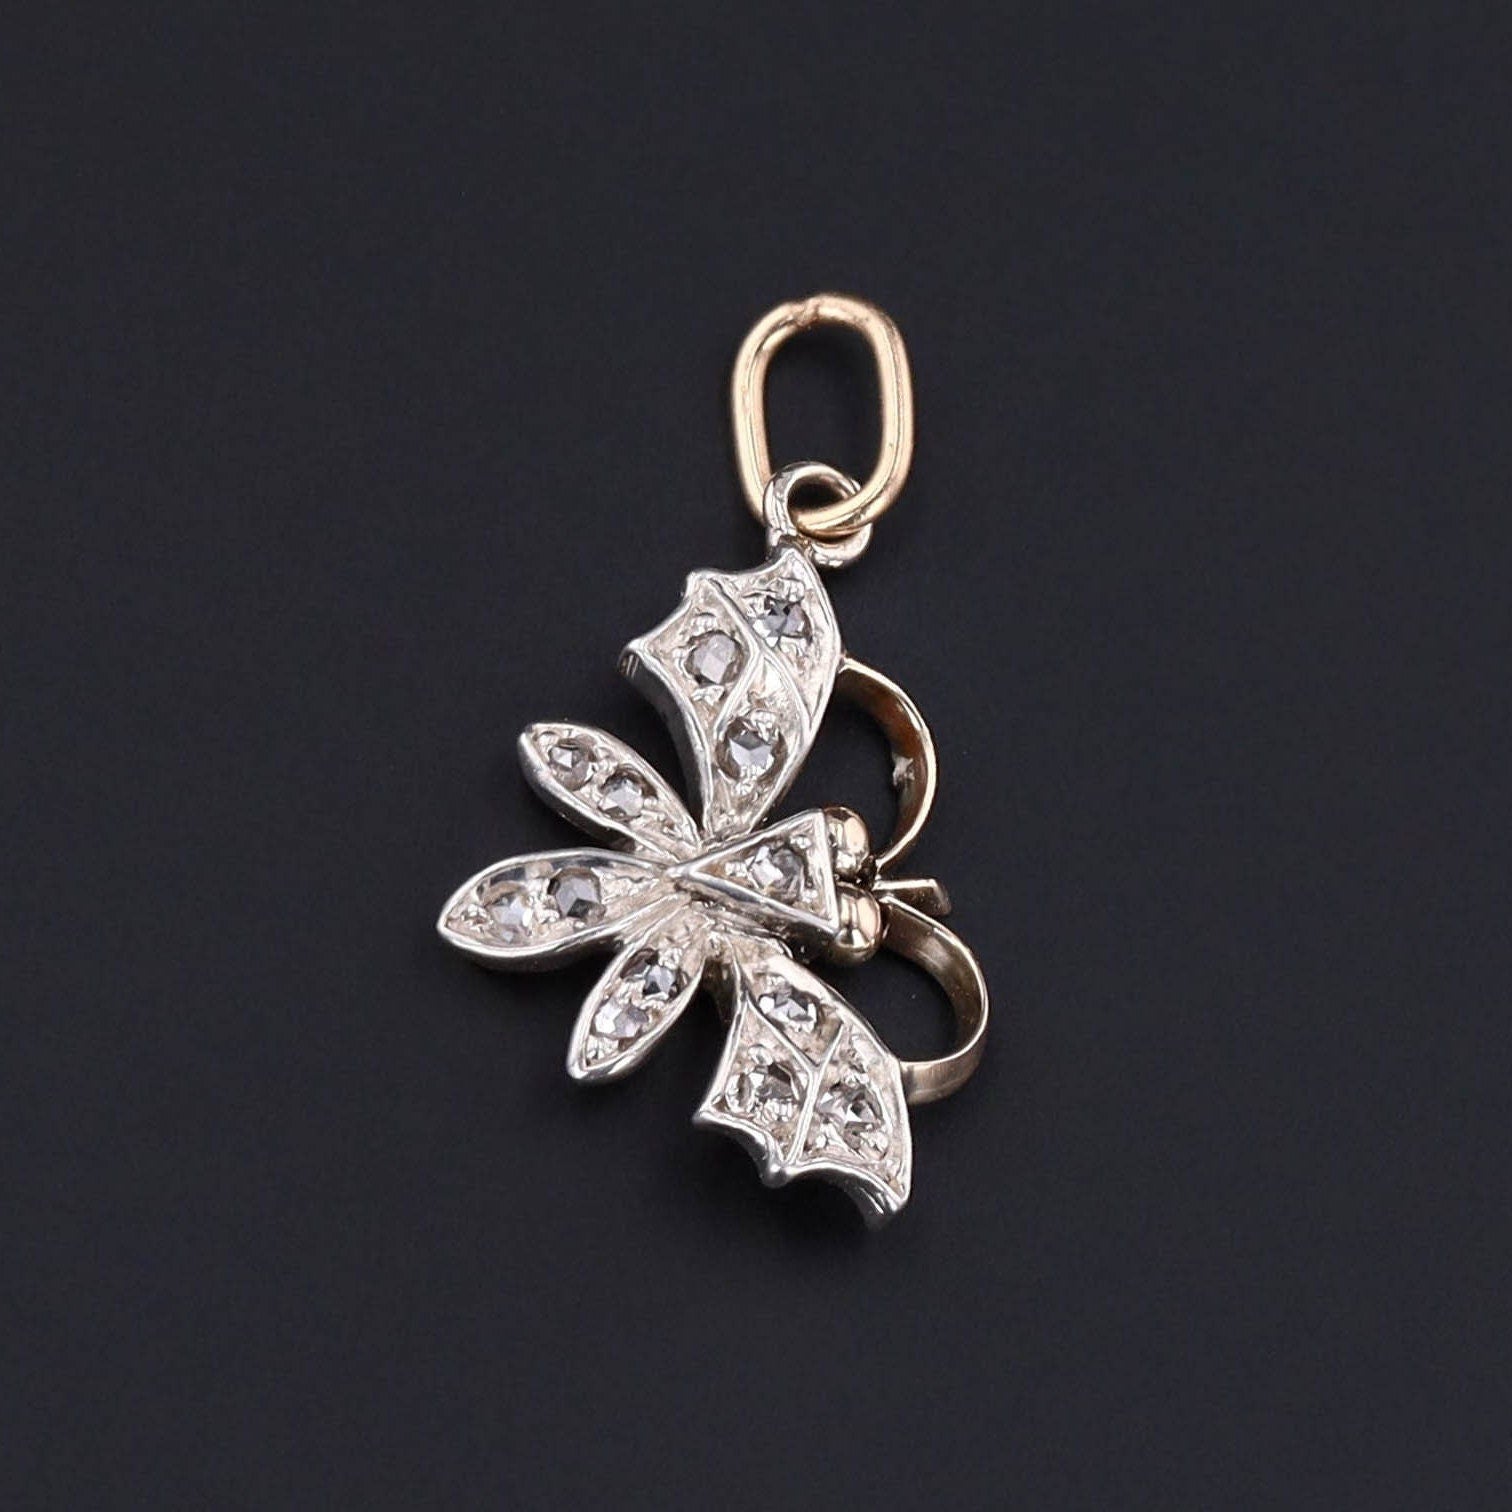 Butterfly Charm | Antique Butterfly Charm 